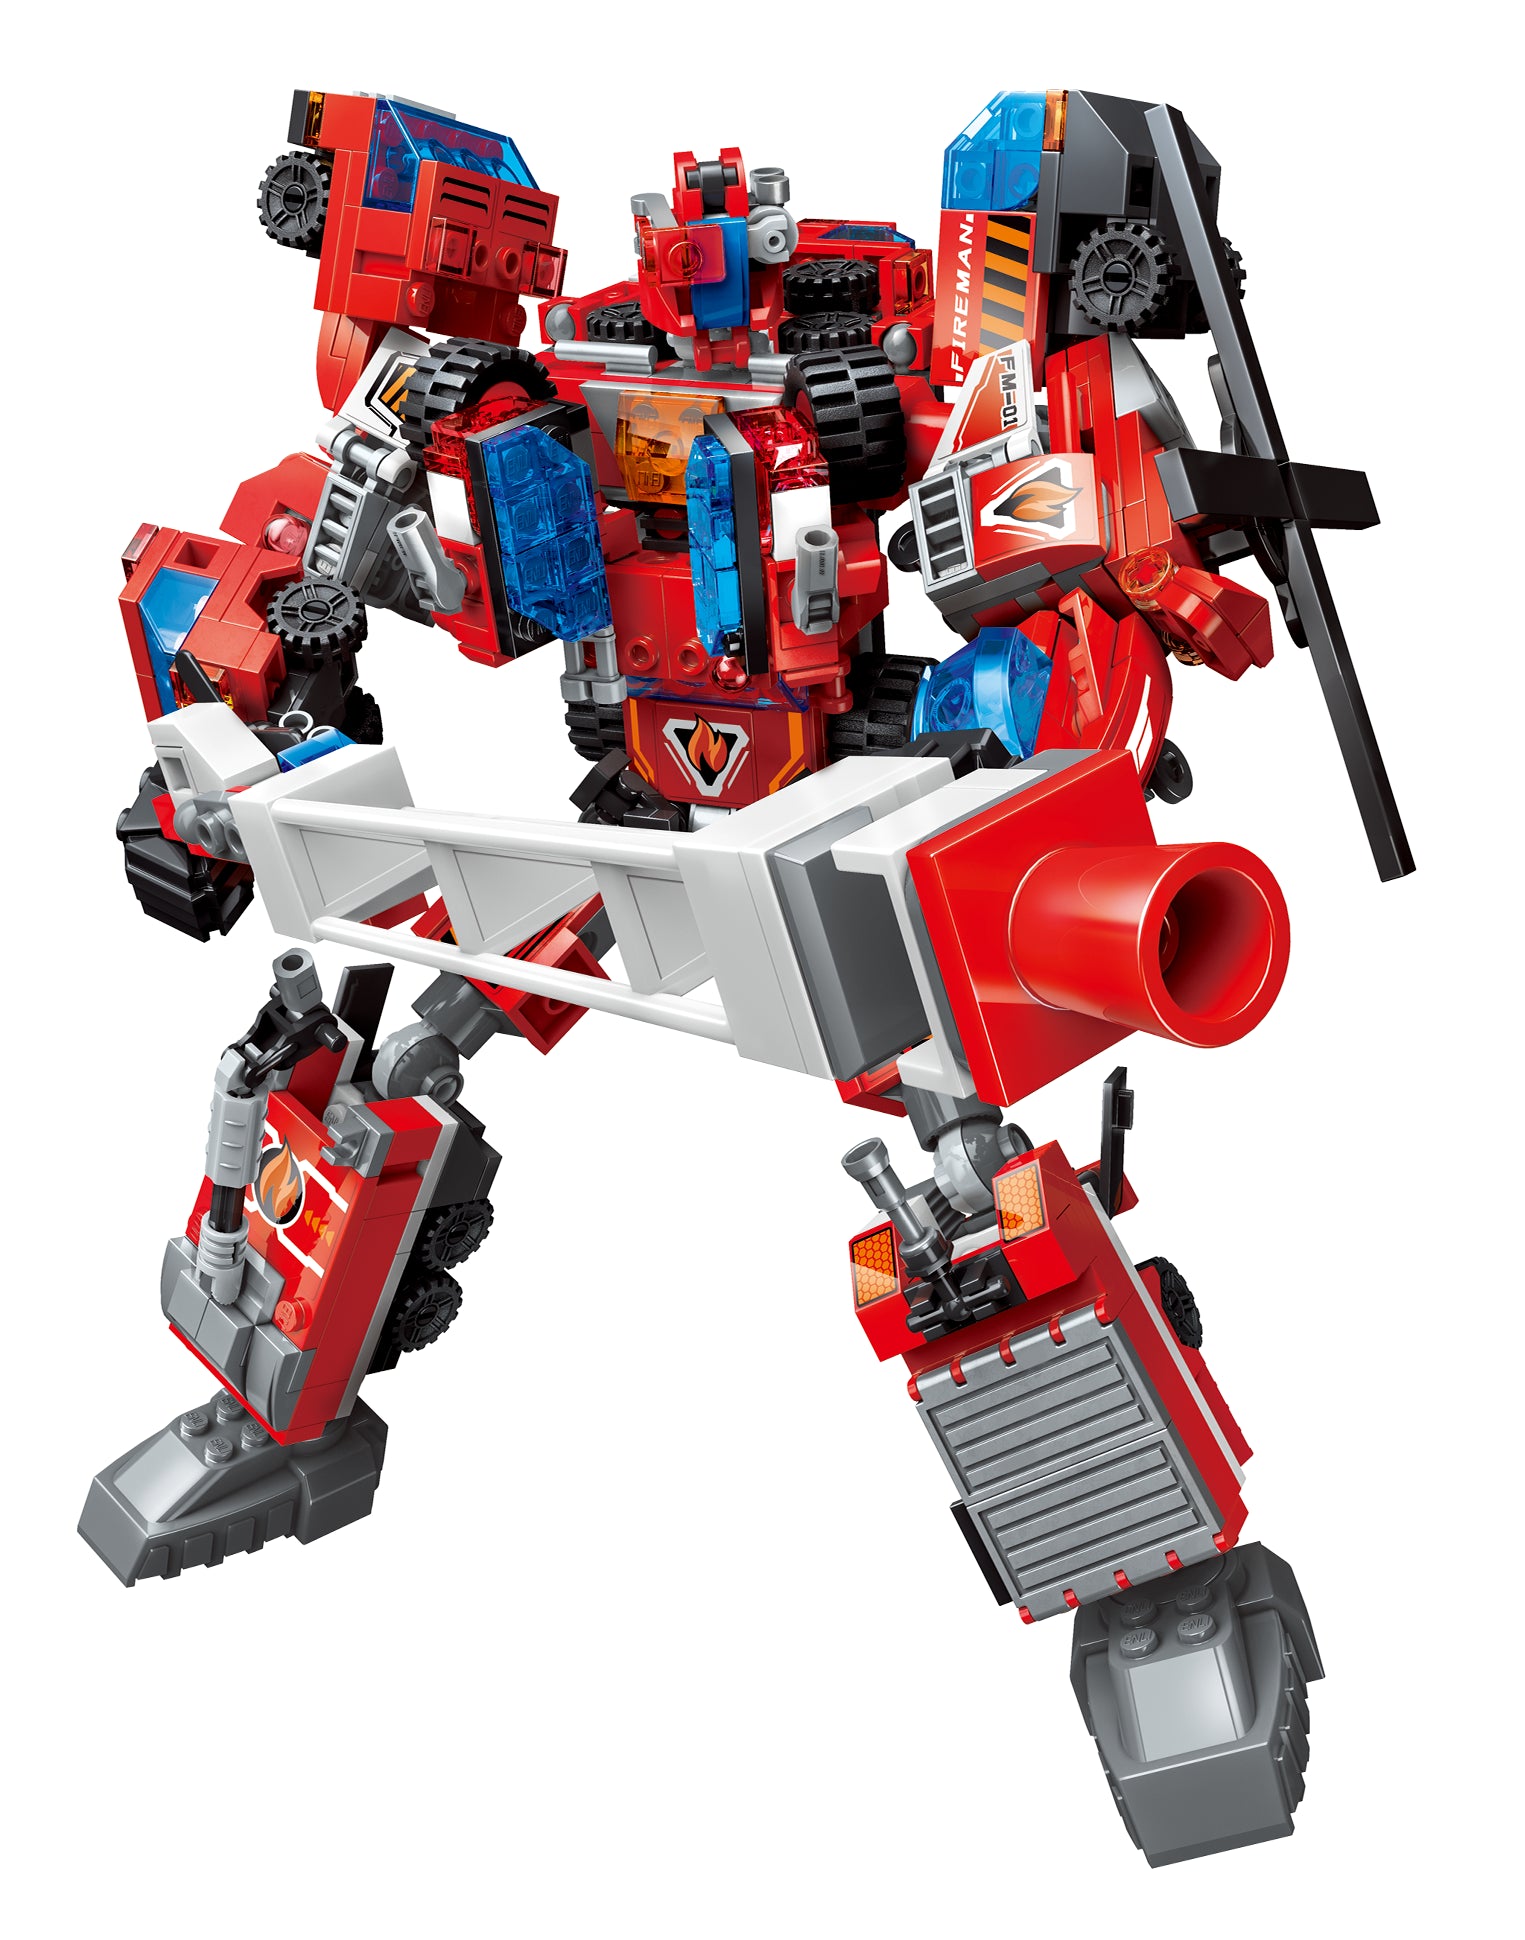 MINISO 6-IN-1 TRANSFORMING FIRE FIGHTER (6 ASSORTED MODELS) 2012591610108 BUILDING BLOCKS